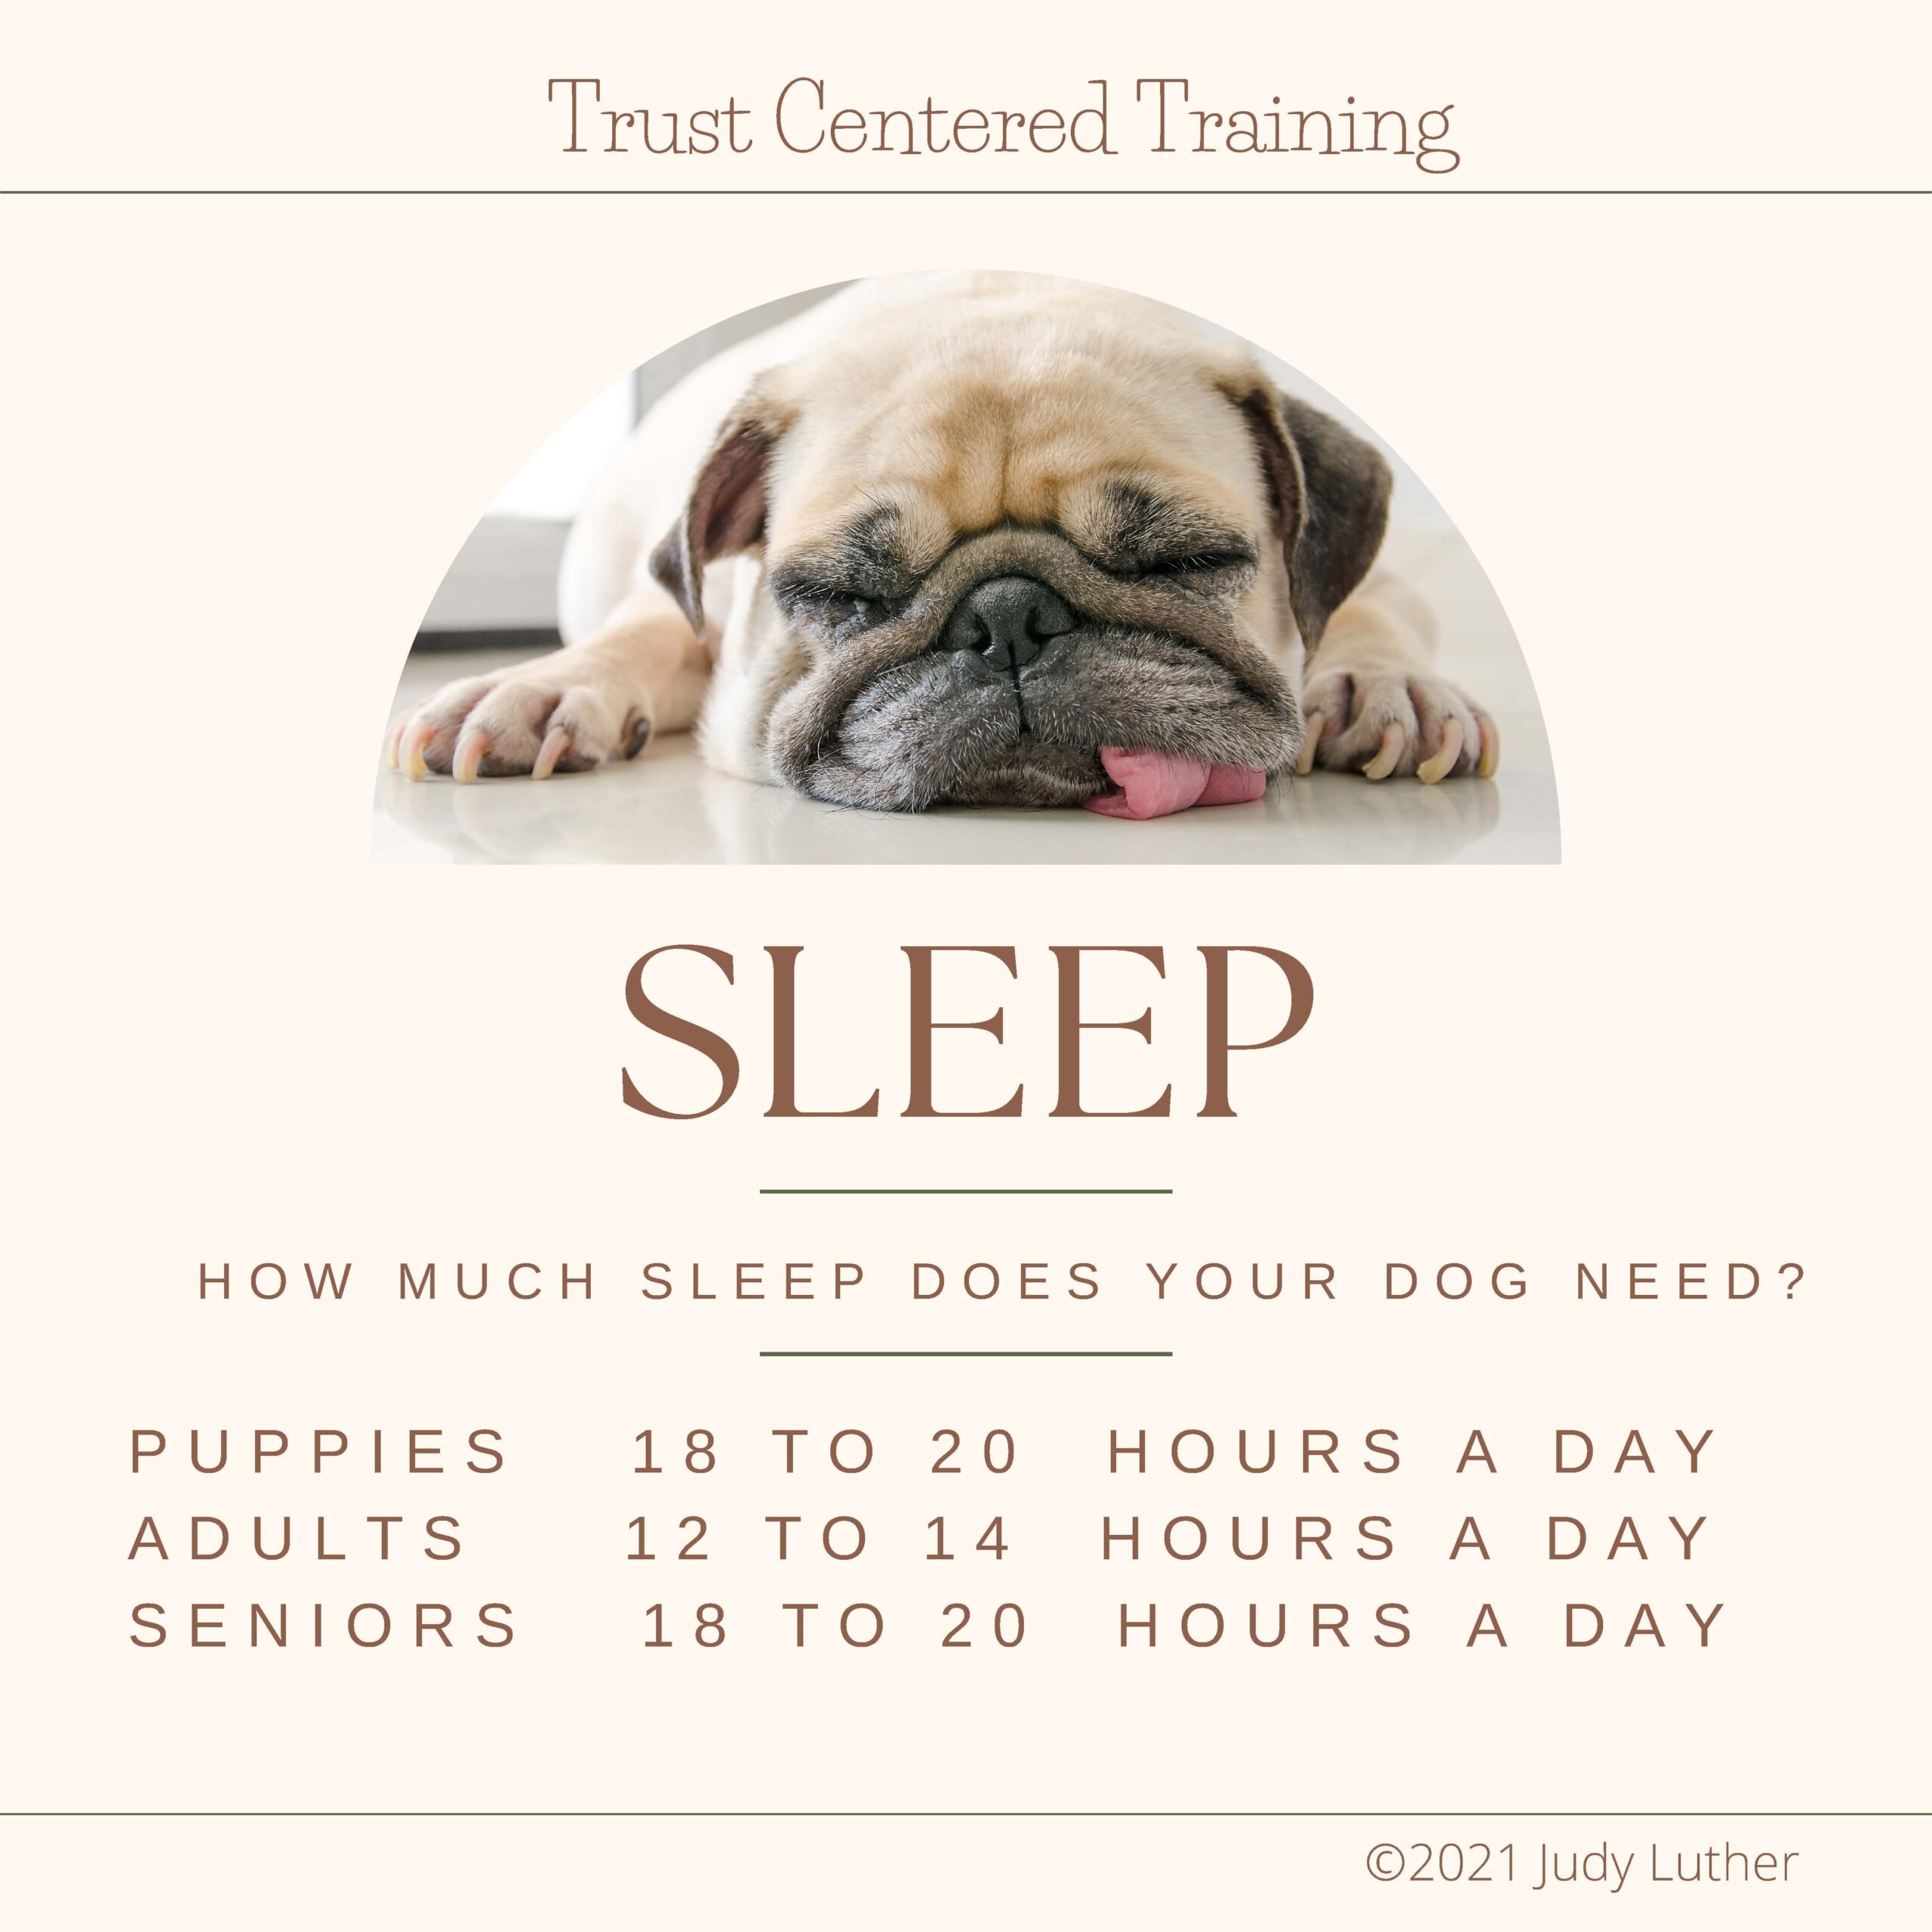 How much sleep does your dog need? Puppies 18-20 hours a day. Adults 12-24 hours a day. Seniors 14-20 hours a day.